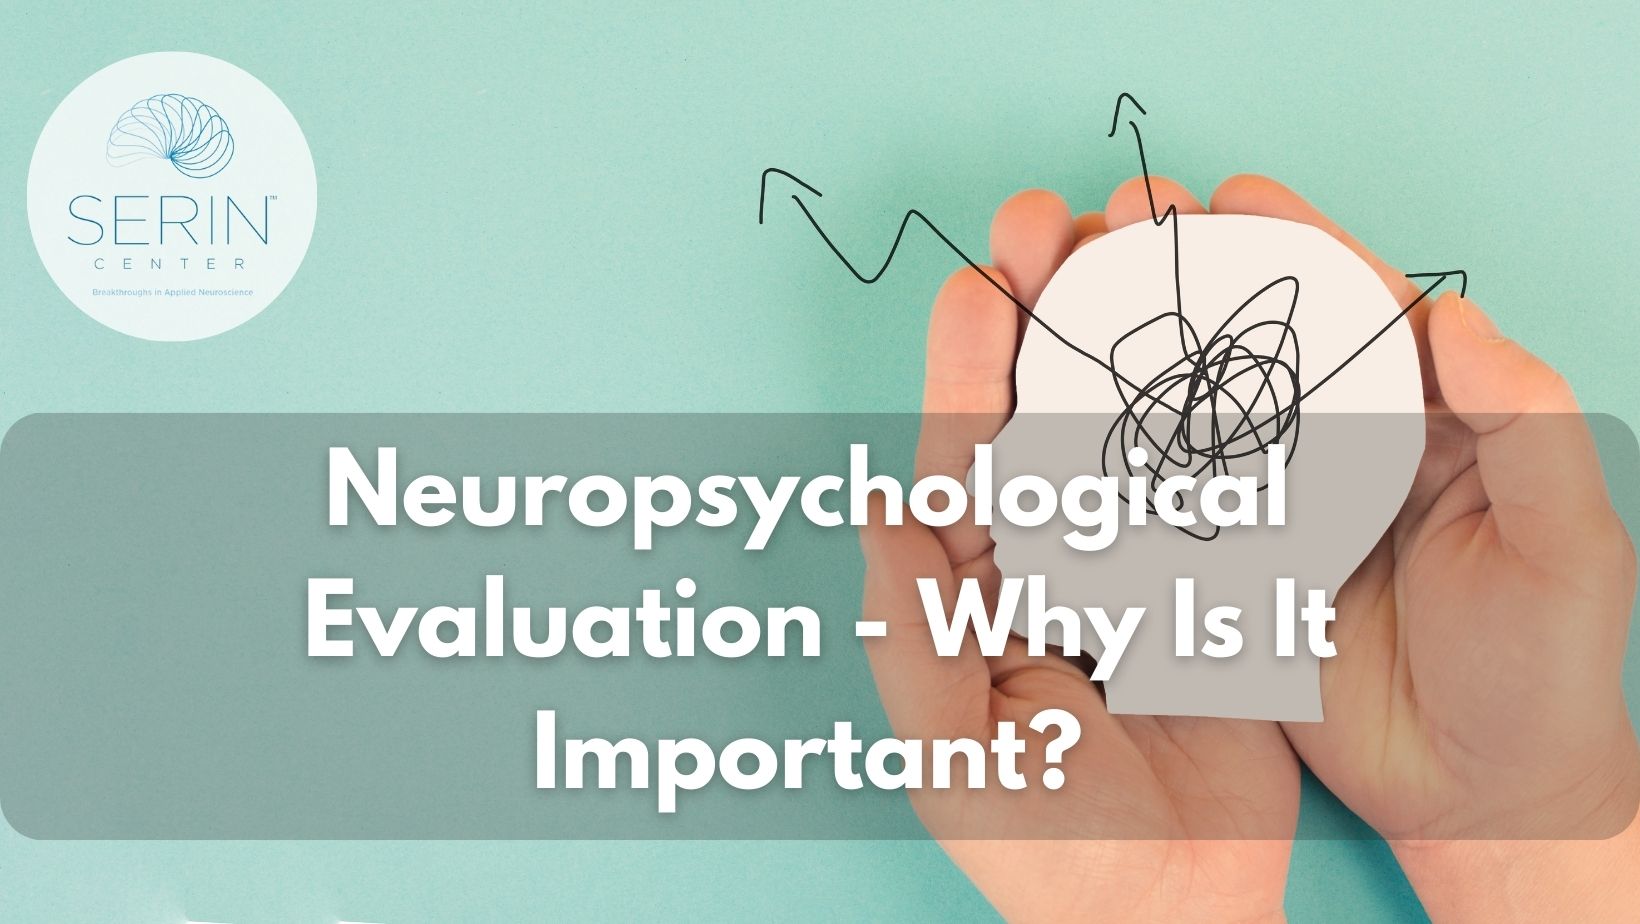 A neuropsychological evaluation is crucial in determining the cognitive and emotional functioning of individuals. This comprehensive assessment helps identify any underlying neurological conditions or brain injuries that may be impacting their daily lives. With